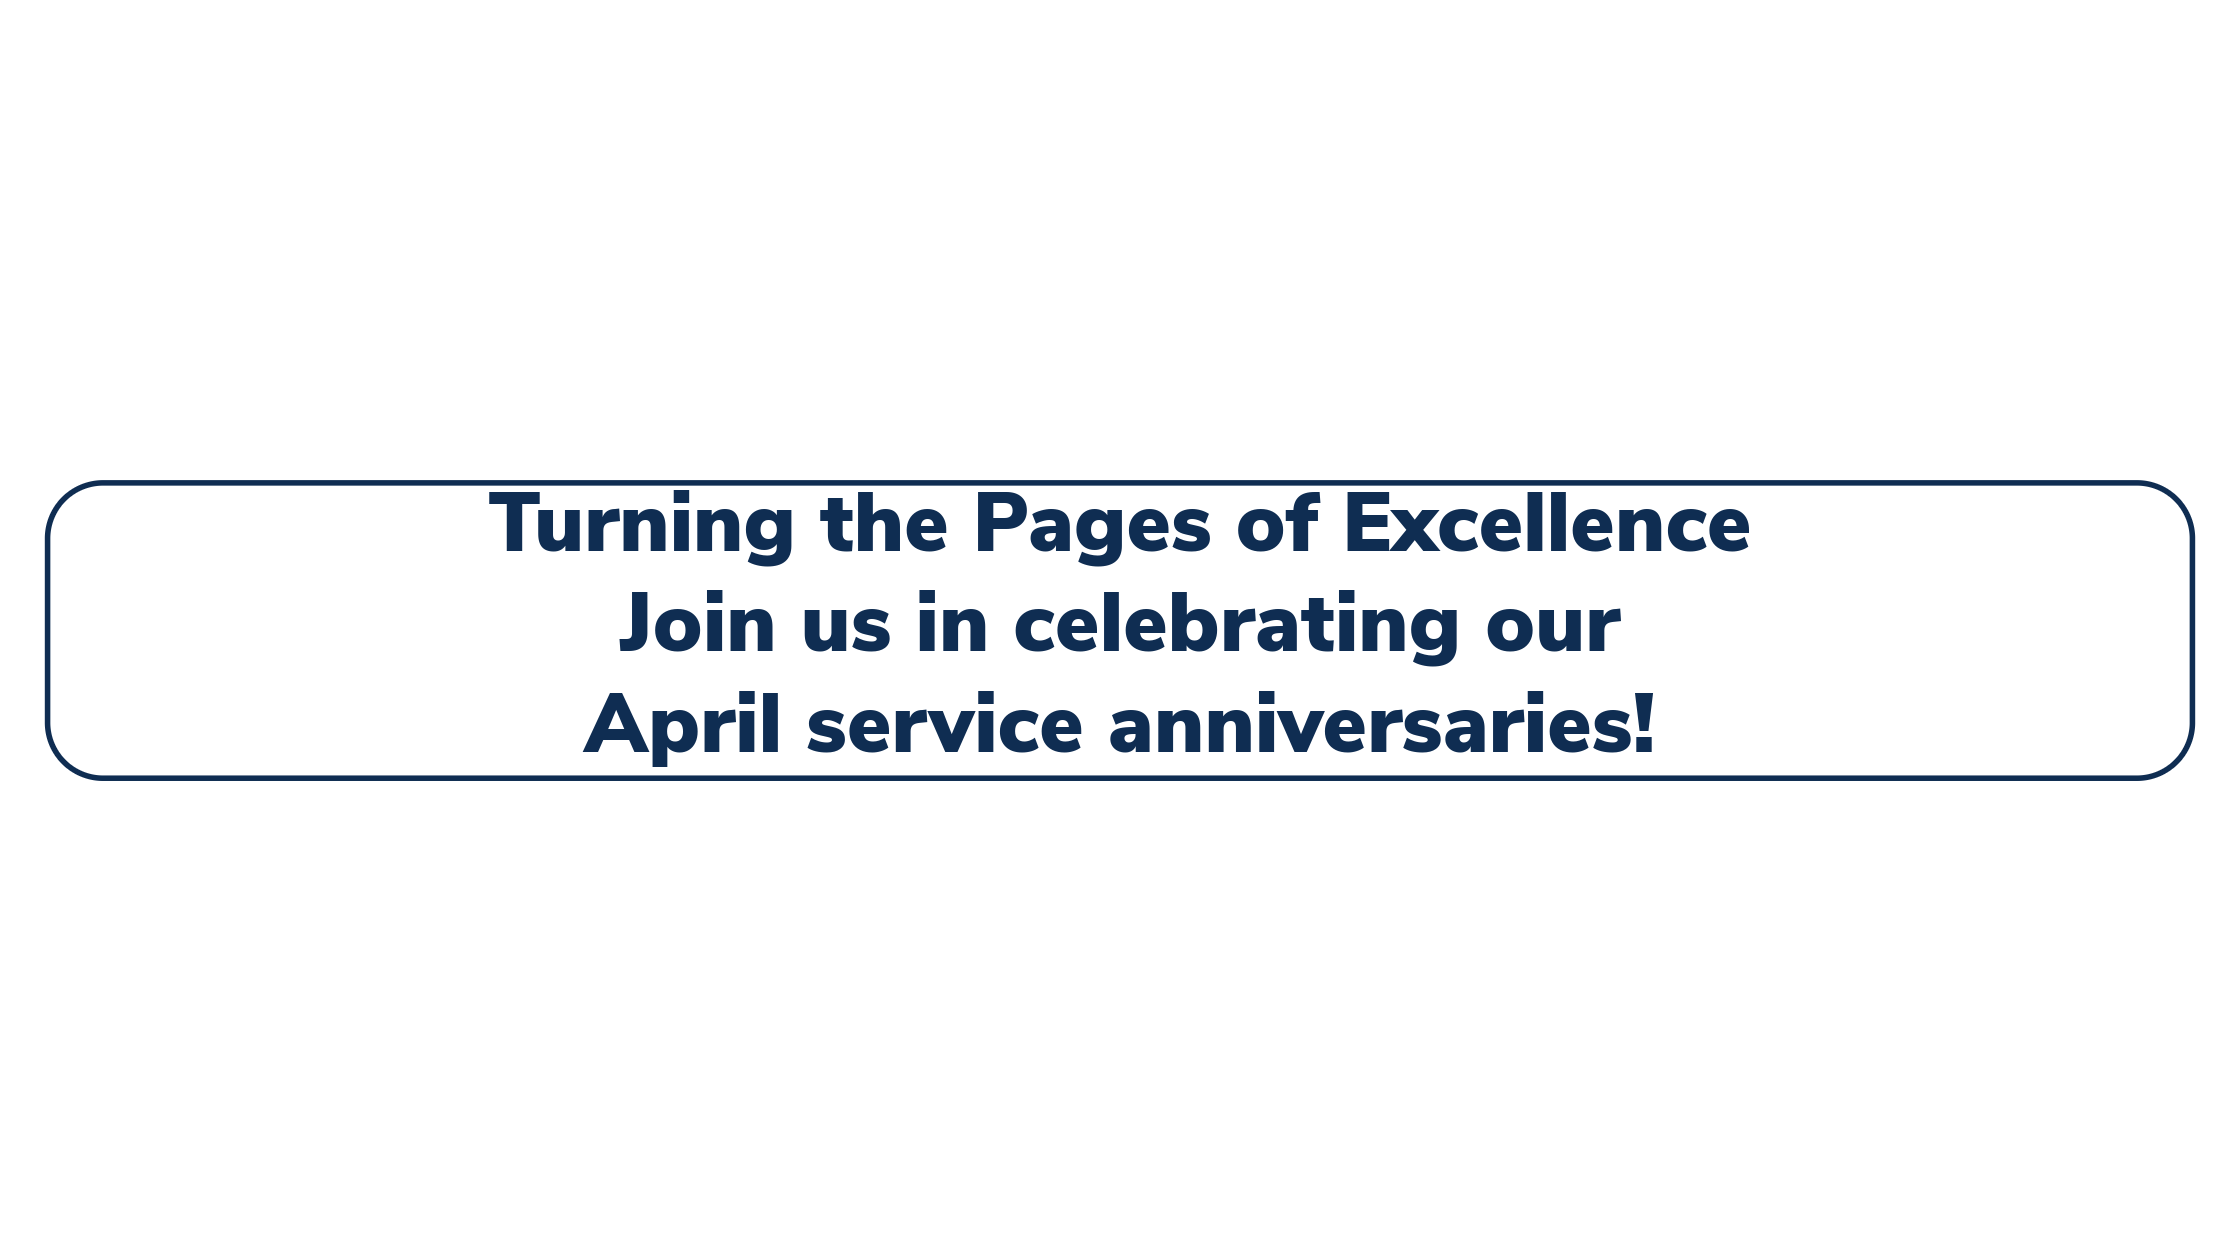 Turning the Pages of Excellence: April Service Anniversaries